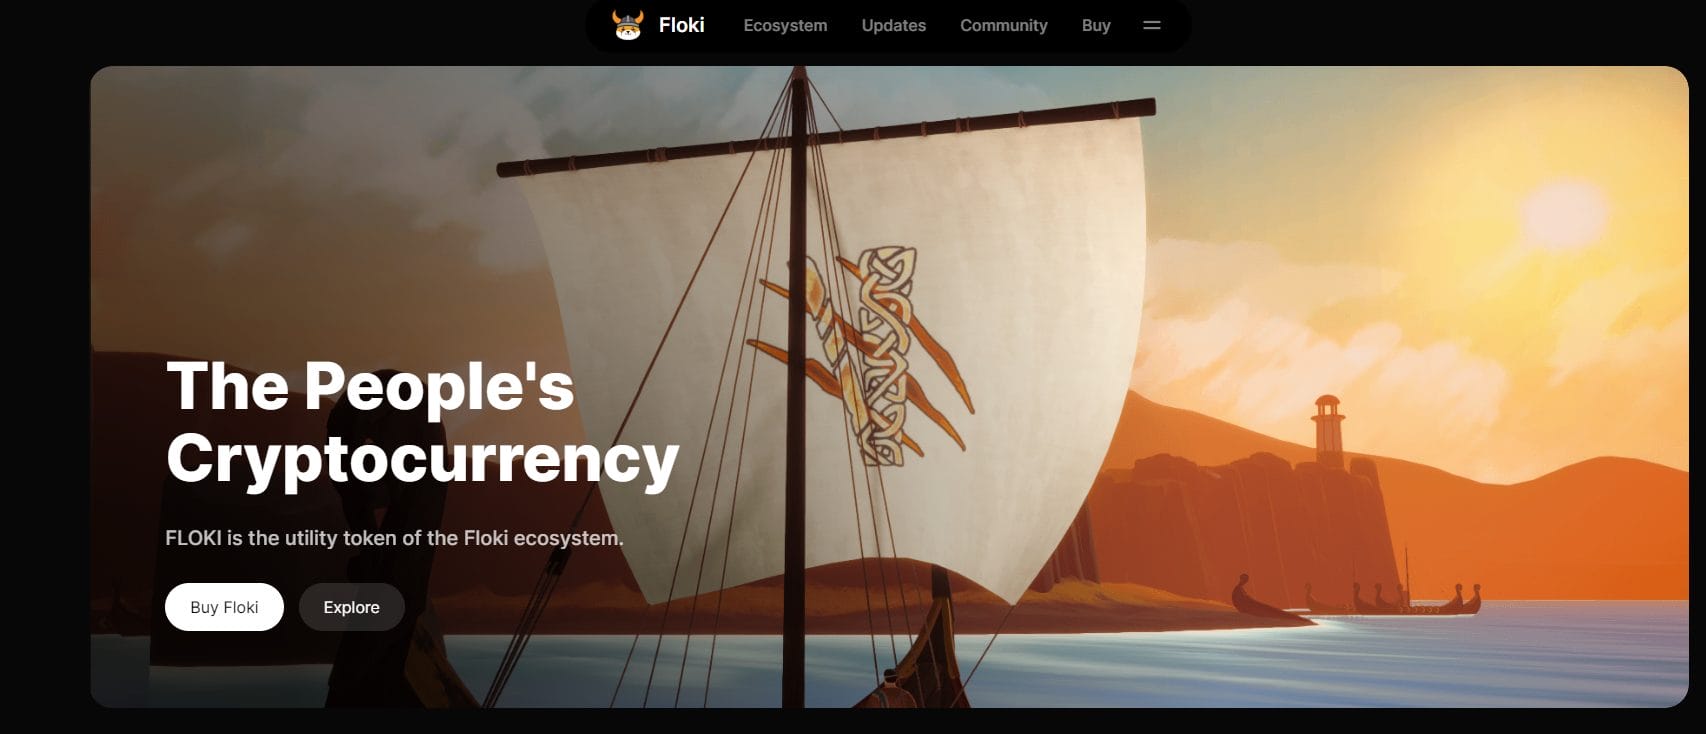 The website homepage of the Floki meme coin